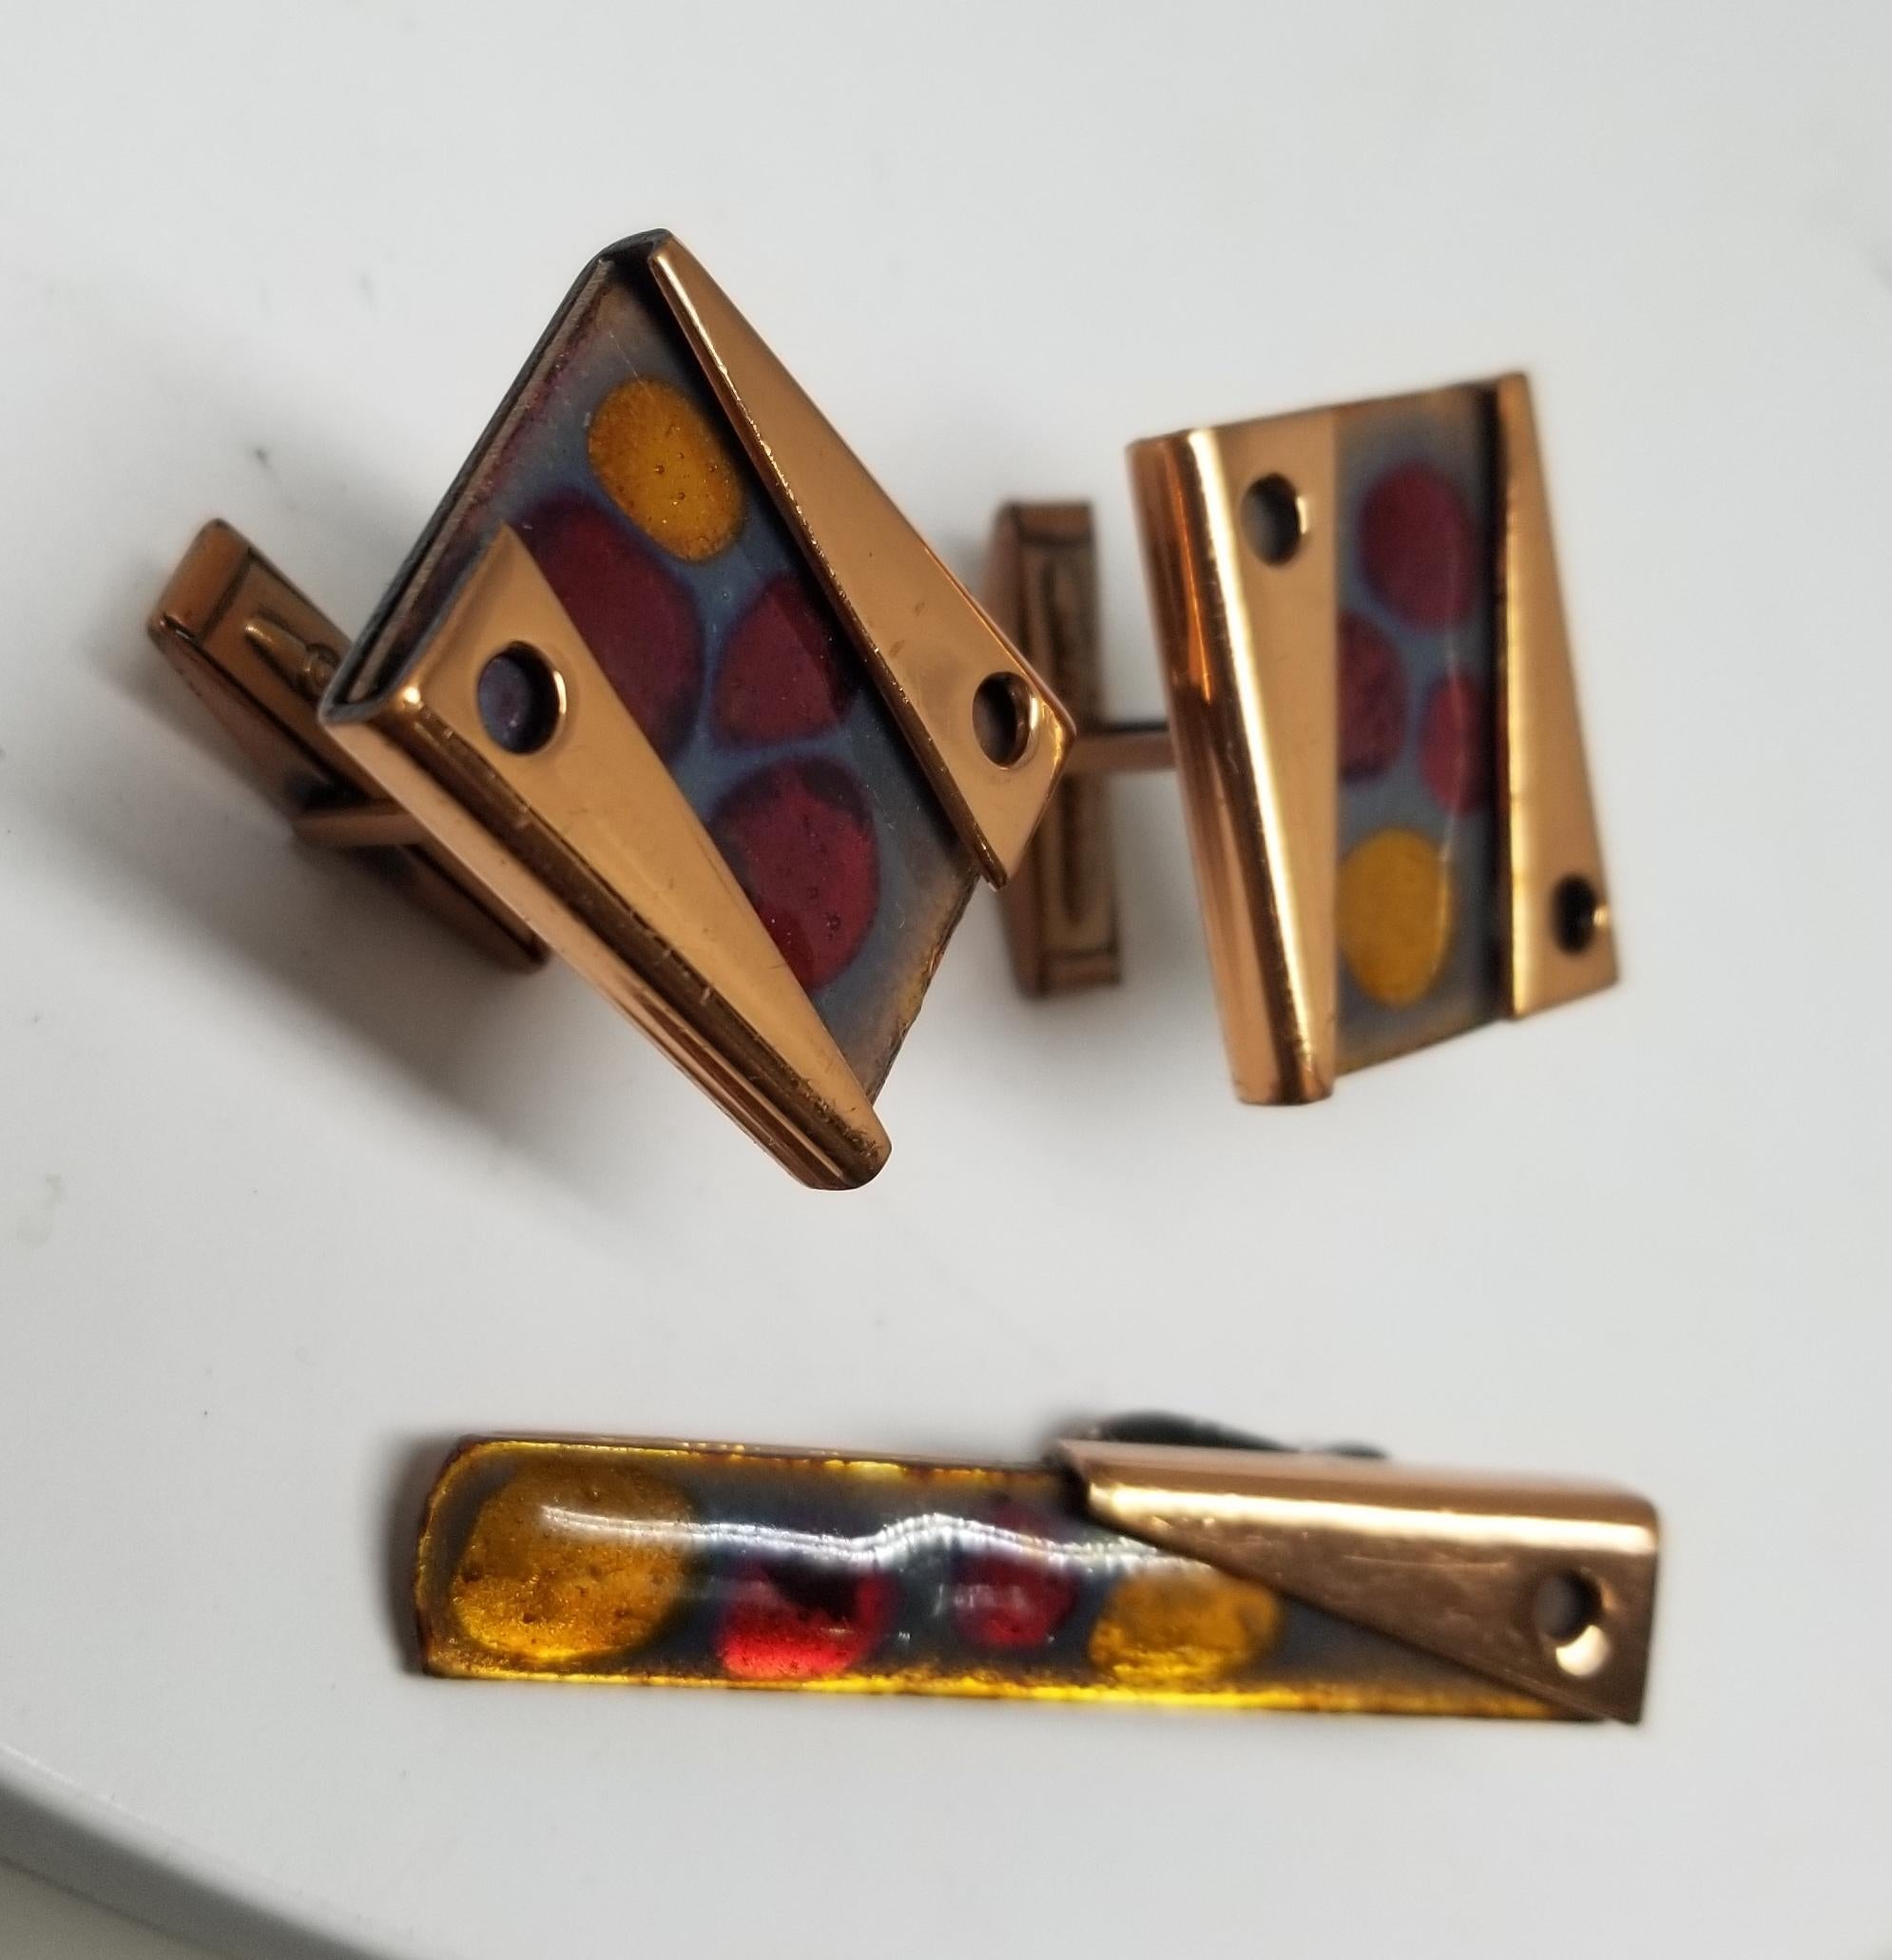 Rare set of vintage 1950s abstract modernist enamel on copper cuff links and tie bar by Matisse of California. Outstanding colorful design to the enamel in grey and colorless with flecks of multi-colors, and set in restrained geometric design copper